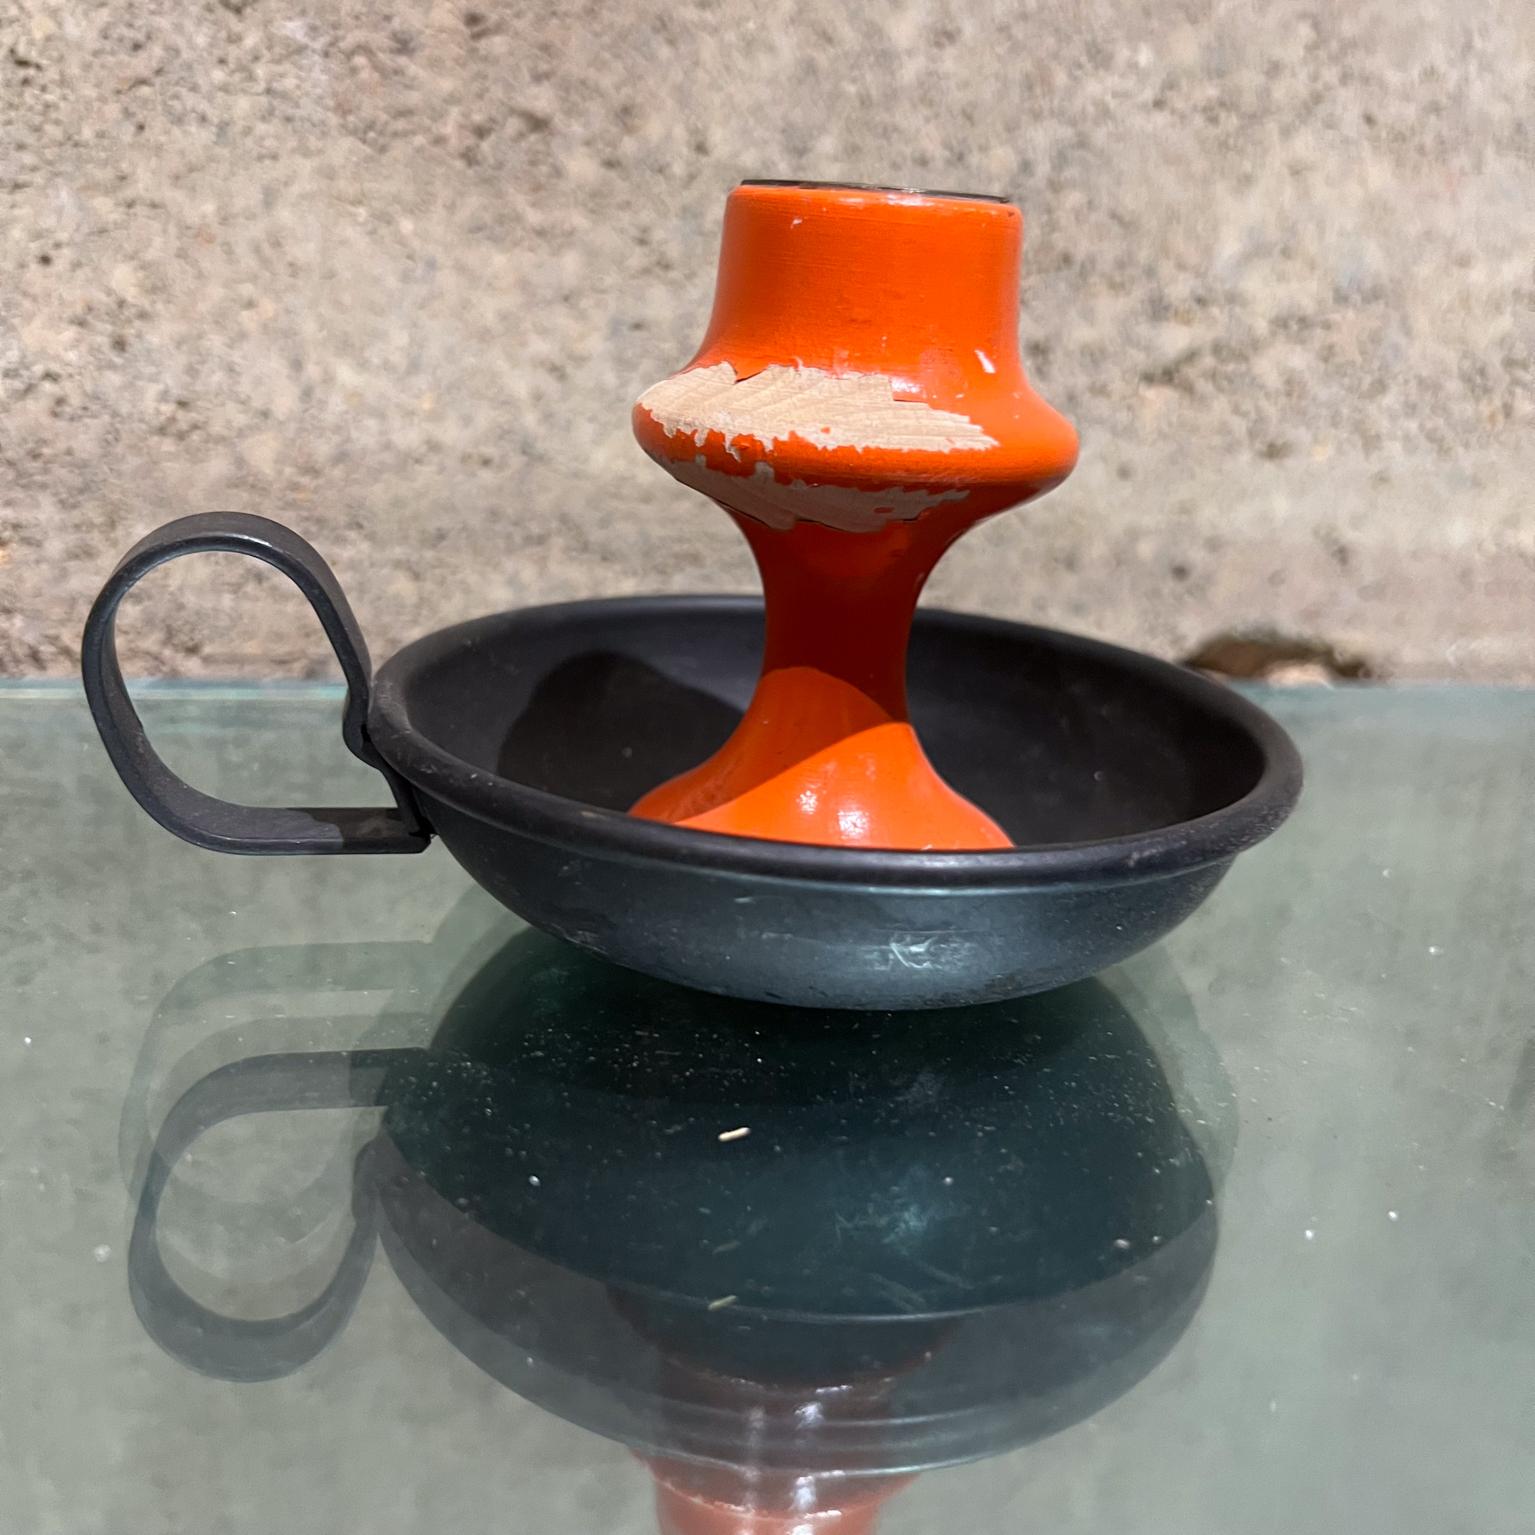 Dansk Hand Painted Wood Candle Holder by A. F. Rasmussen Denmark 1960s
Wood painted Orange original Metal Base.
Stamped with makers label underneath.
3 H x 5.5 D x 4.25 in diameter.
Preowned original vintage unrestored condition. Scuffs and